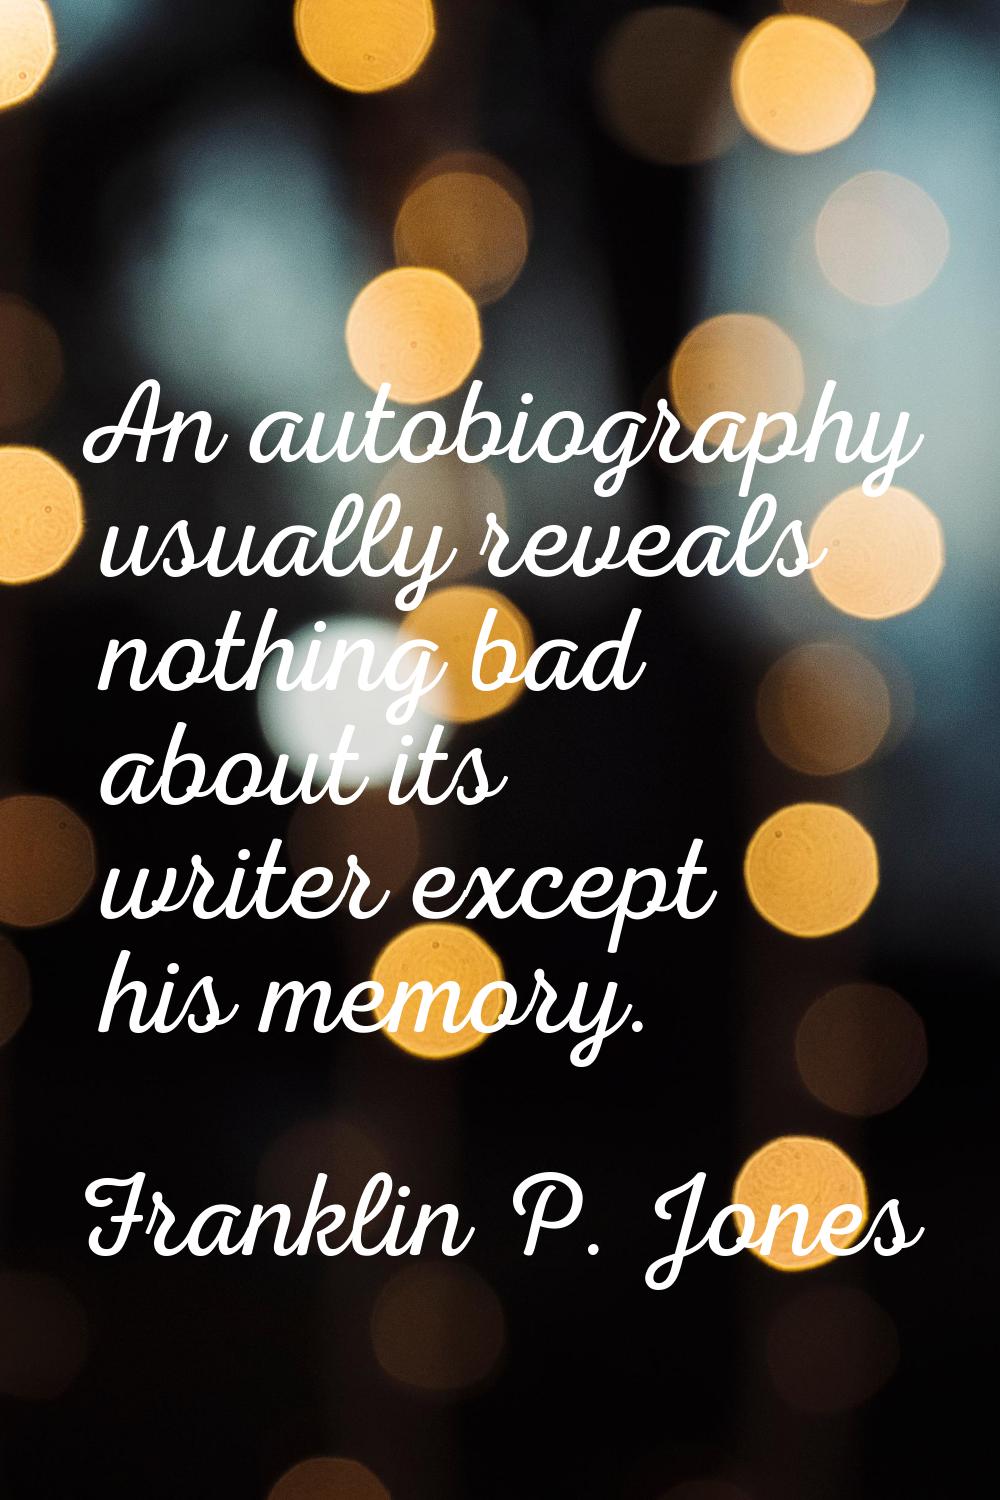 An autobiography usually reveals nothing bad about its writer except his memory.